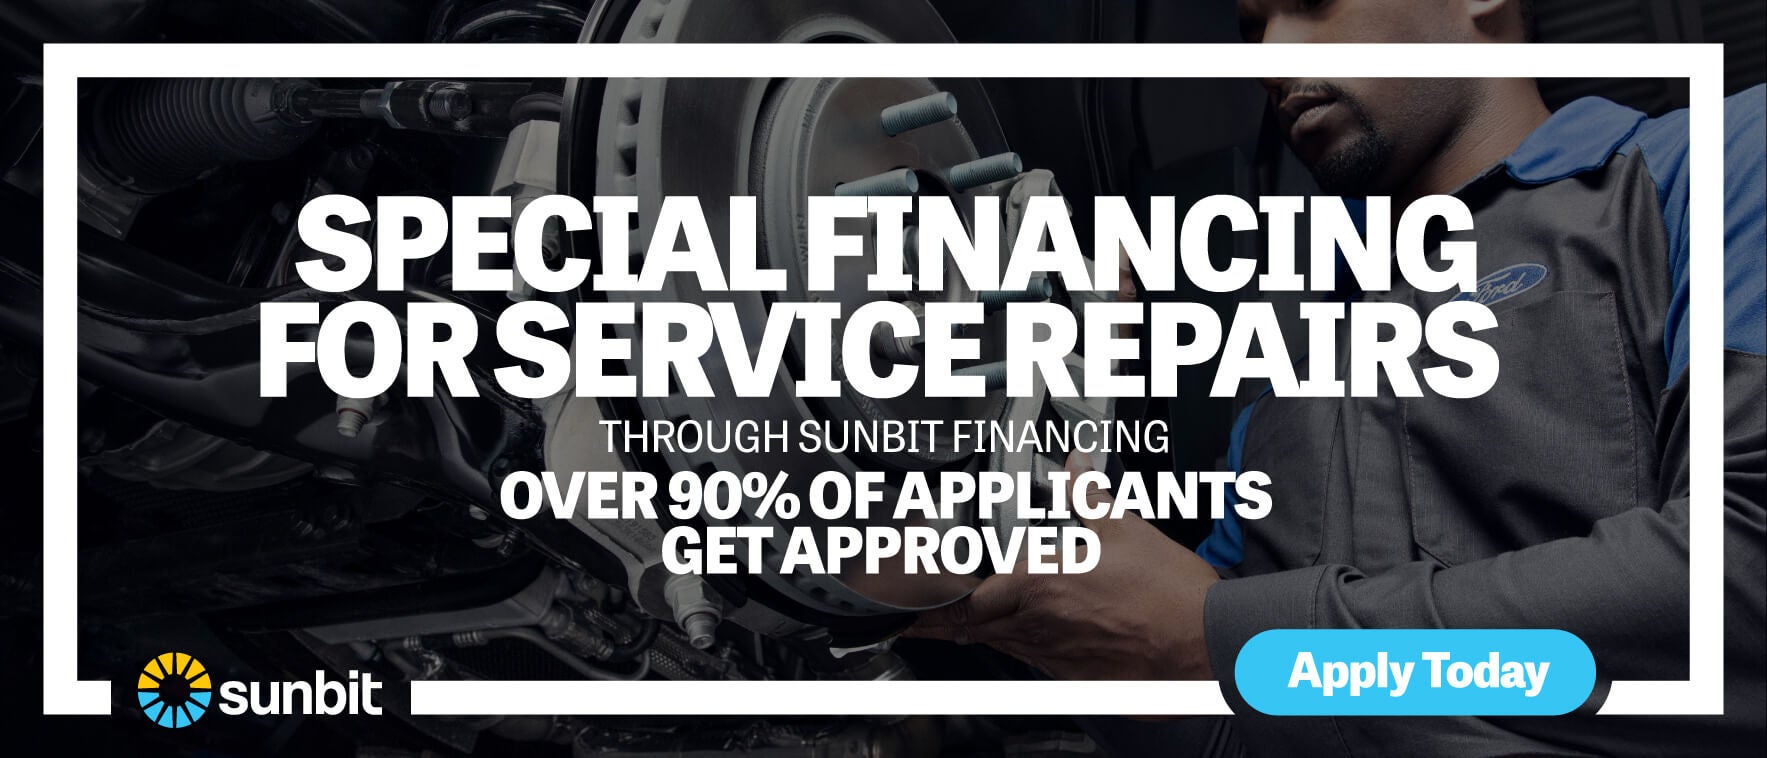 Special Financing for Service Repairs